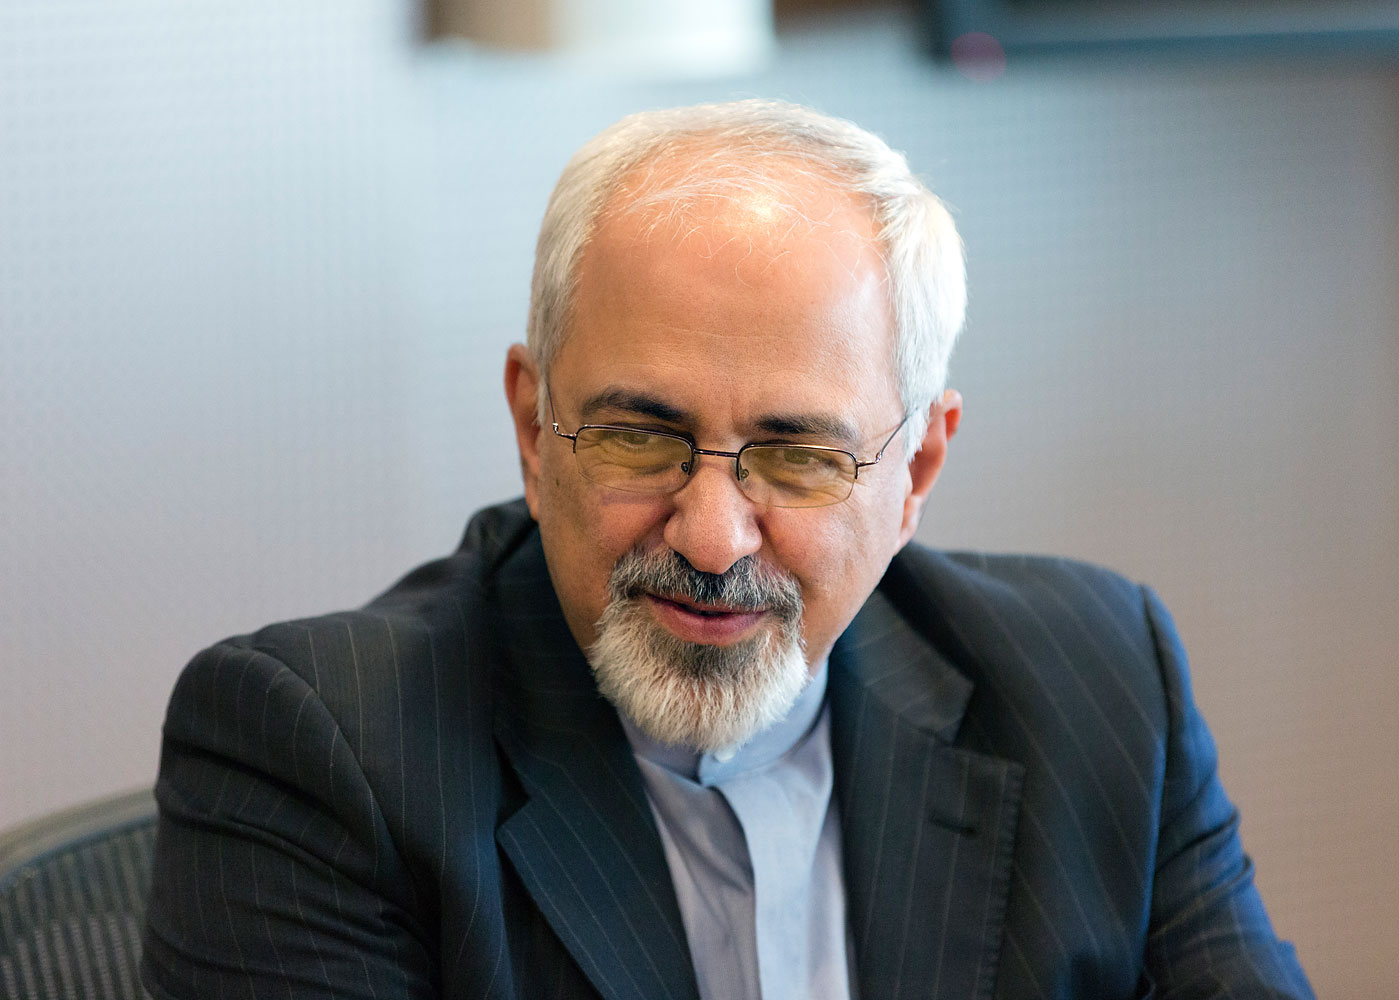 Mohammad Javad Zarif, Foreign Minister of Iran, in New York City, Sept. 24, 2013. (Thomas Koehler / Photothek / Getty Images)